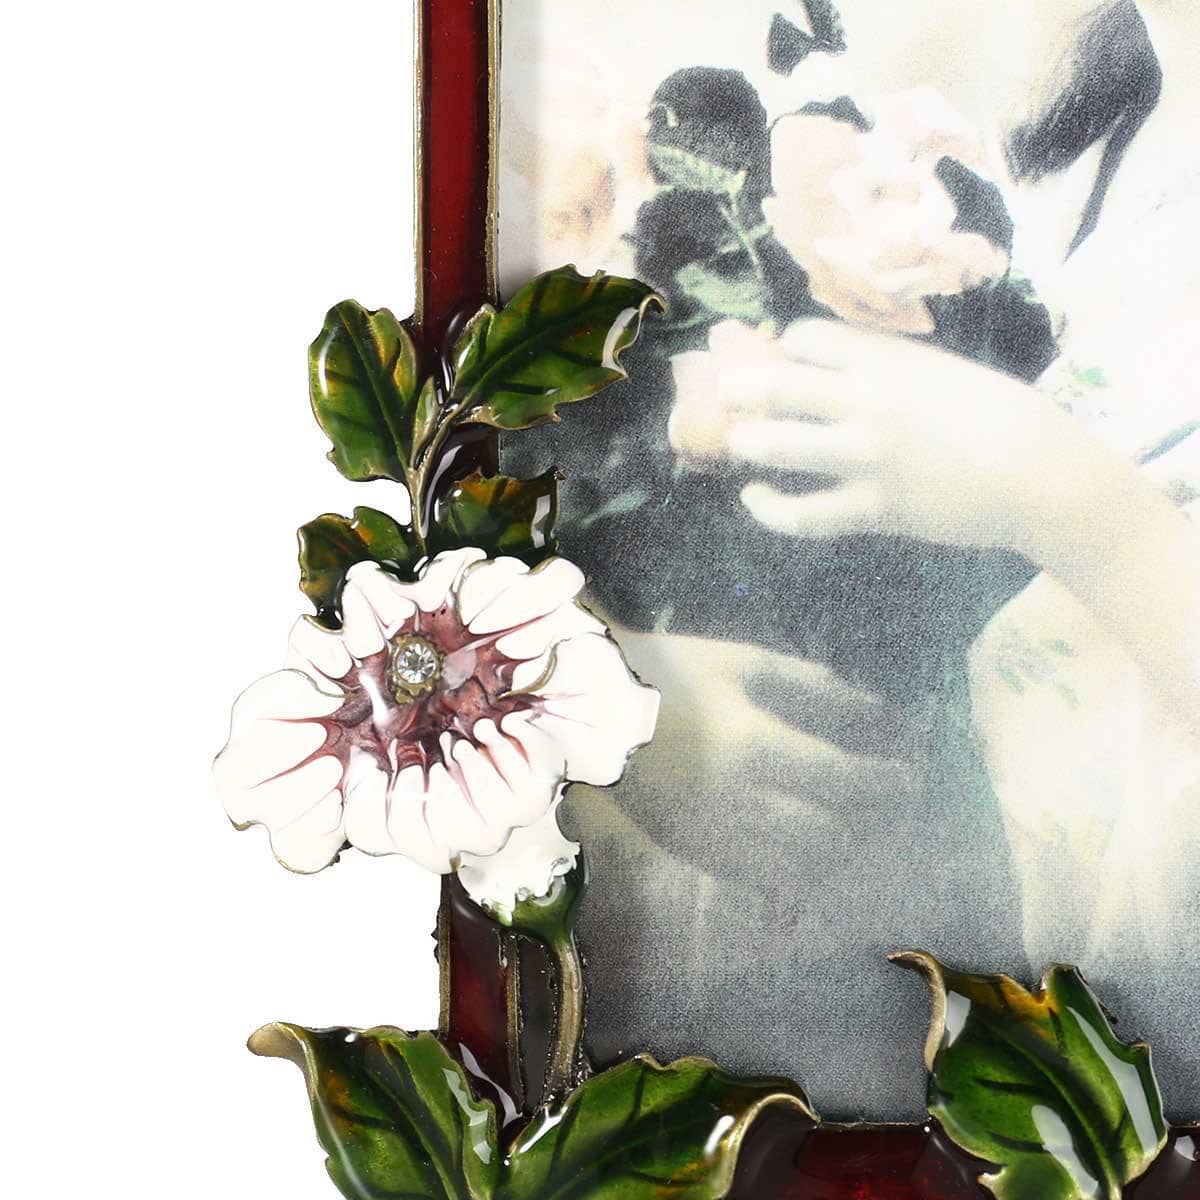 Branches & Flower Alloy Photo Frame - Display Memories in Style